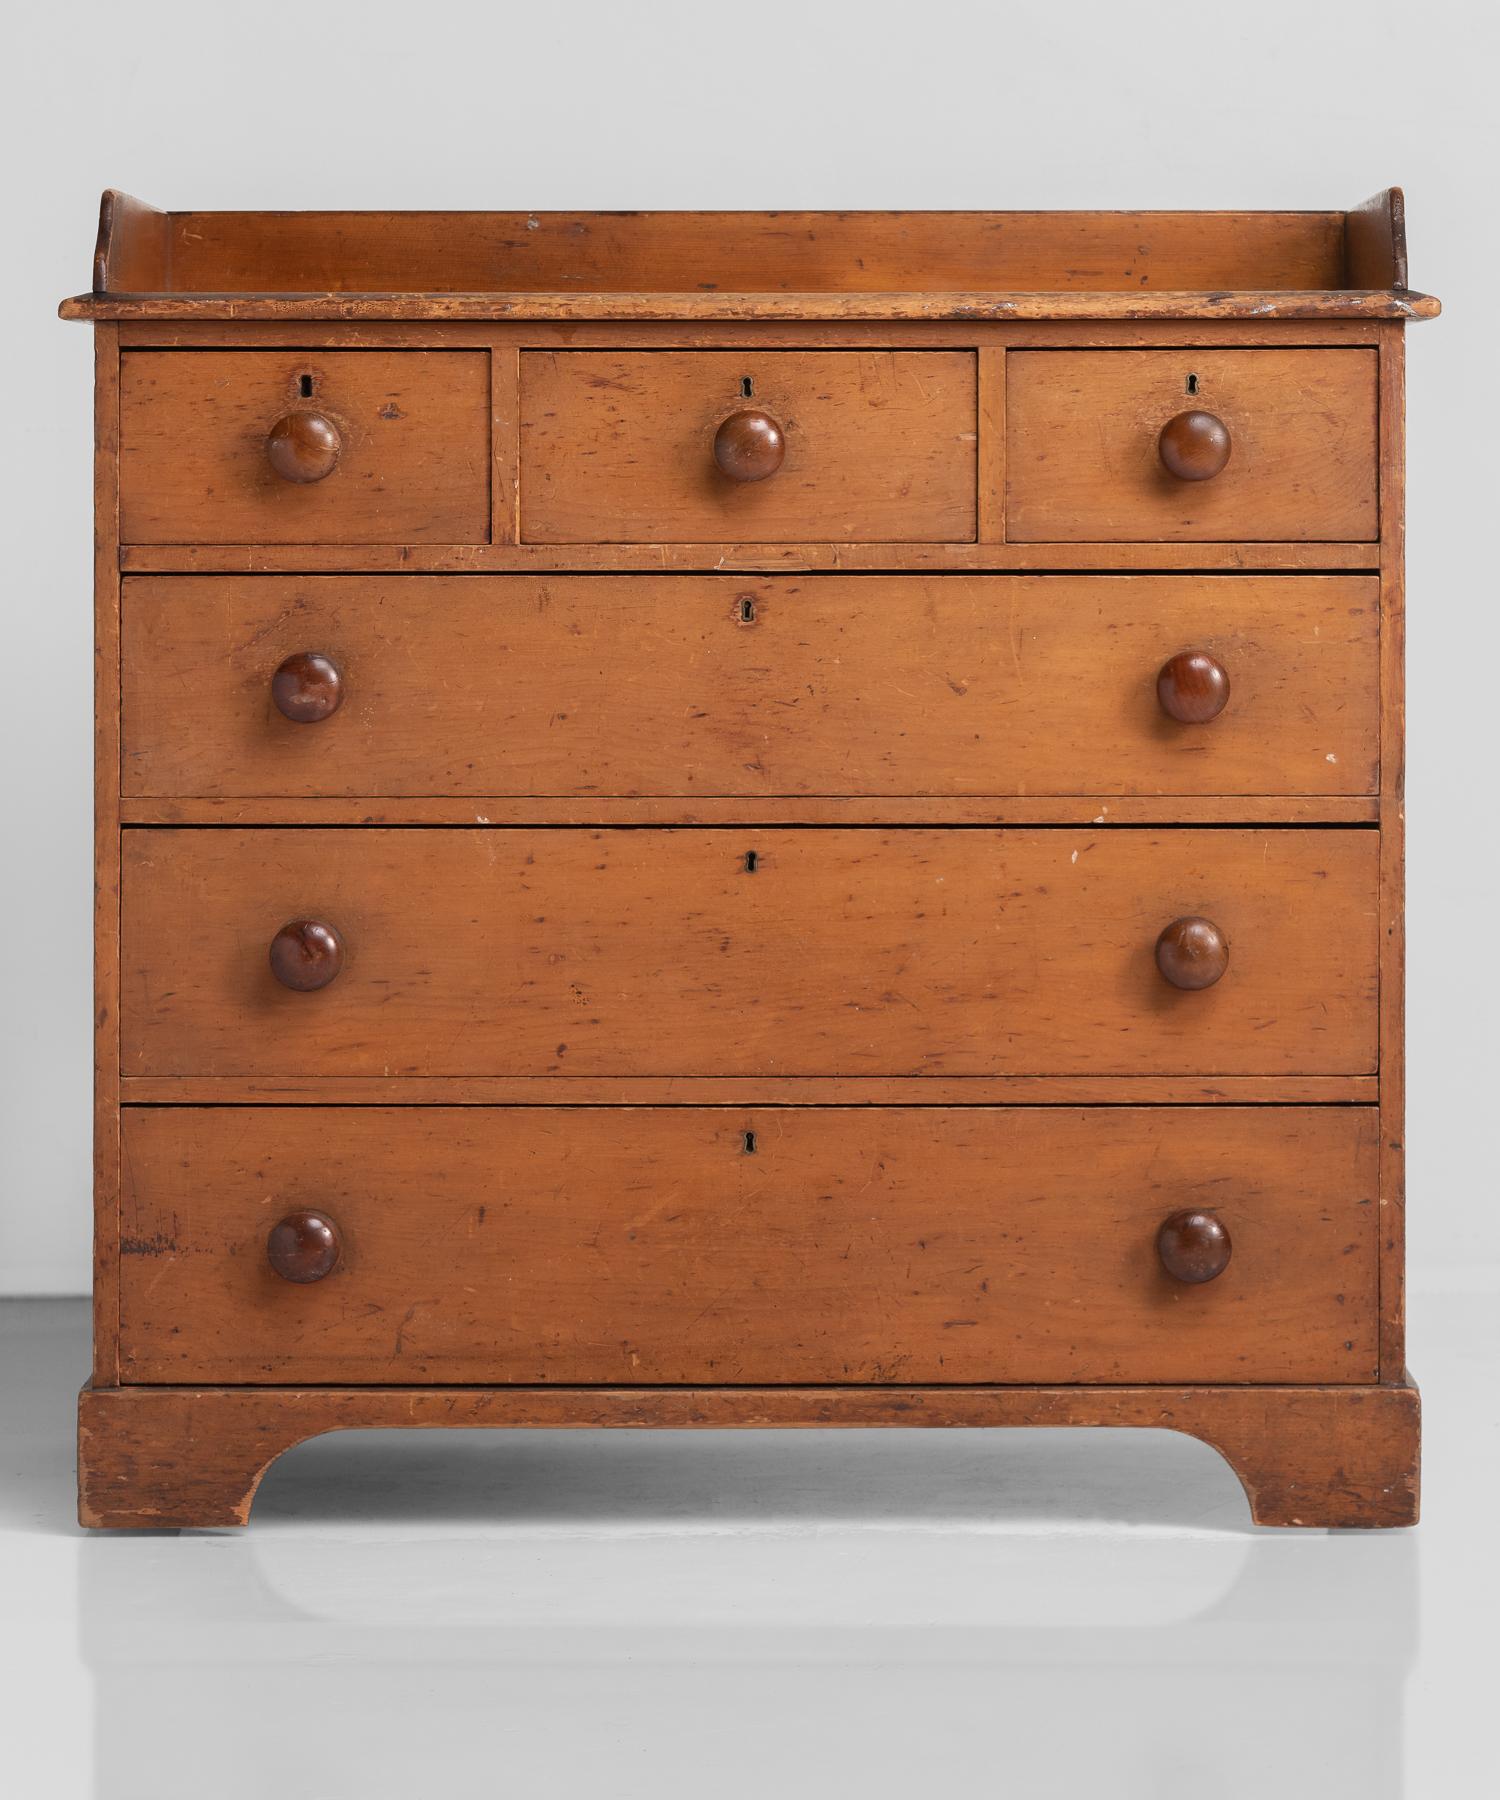 pine chest of drawers